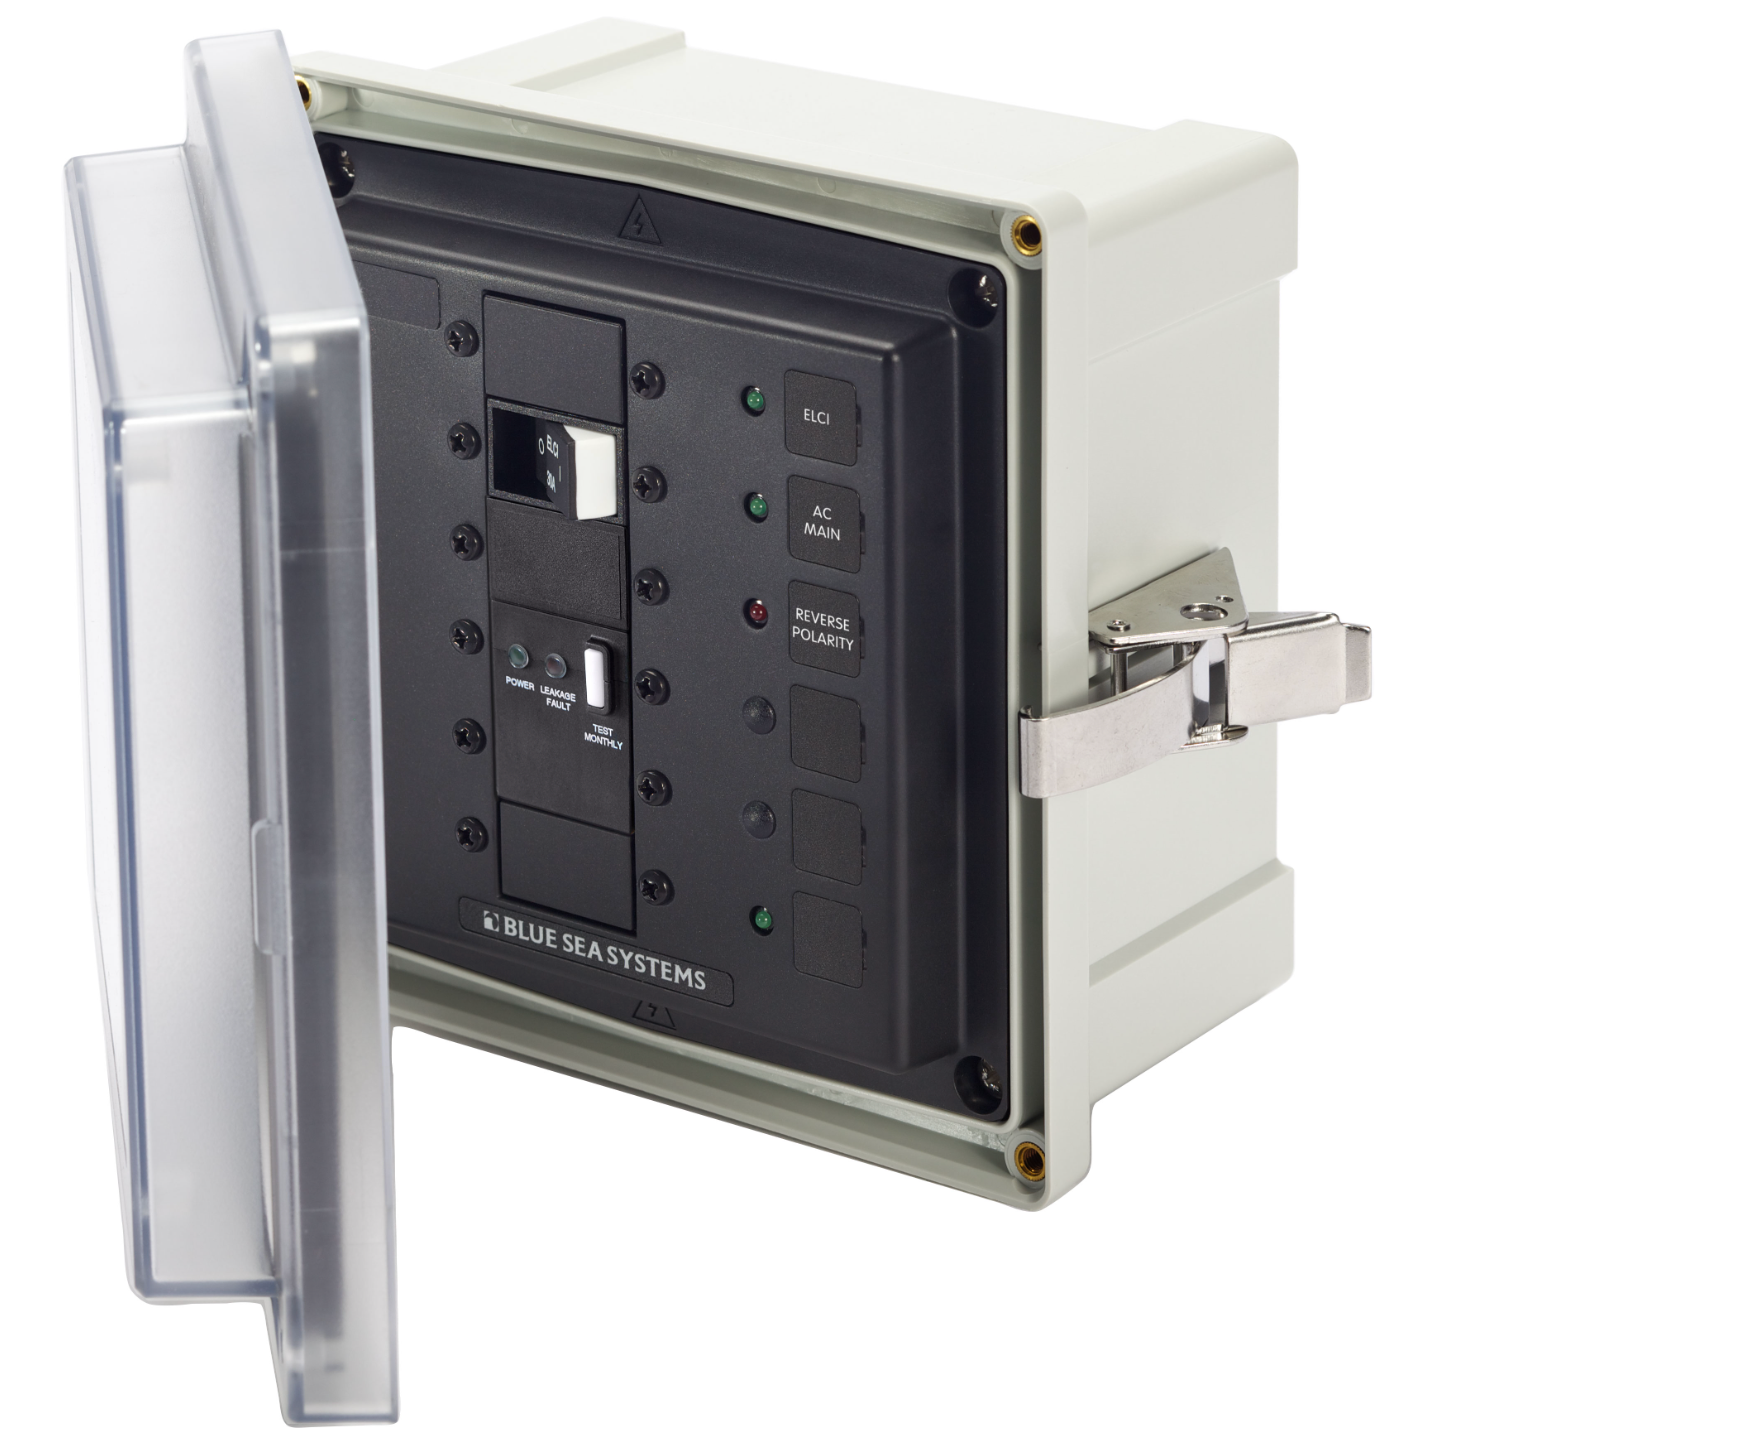 SMS Surface Mount System Panel Enclosure - 120/240V AC / 50A ELCI Main - 1 blank circuit position